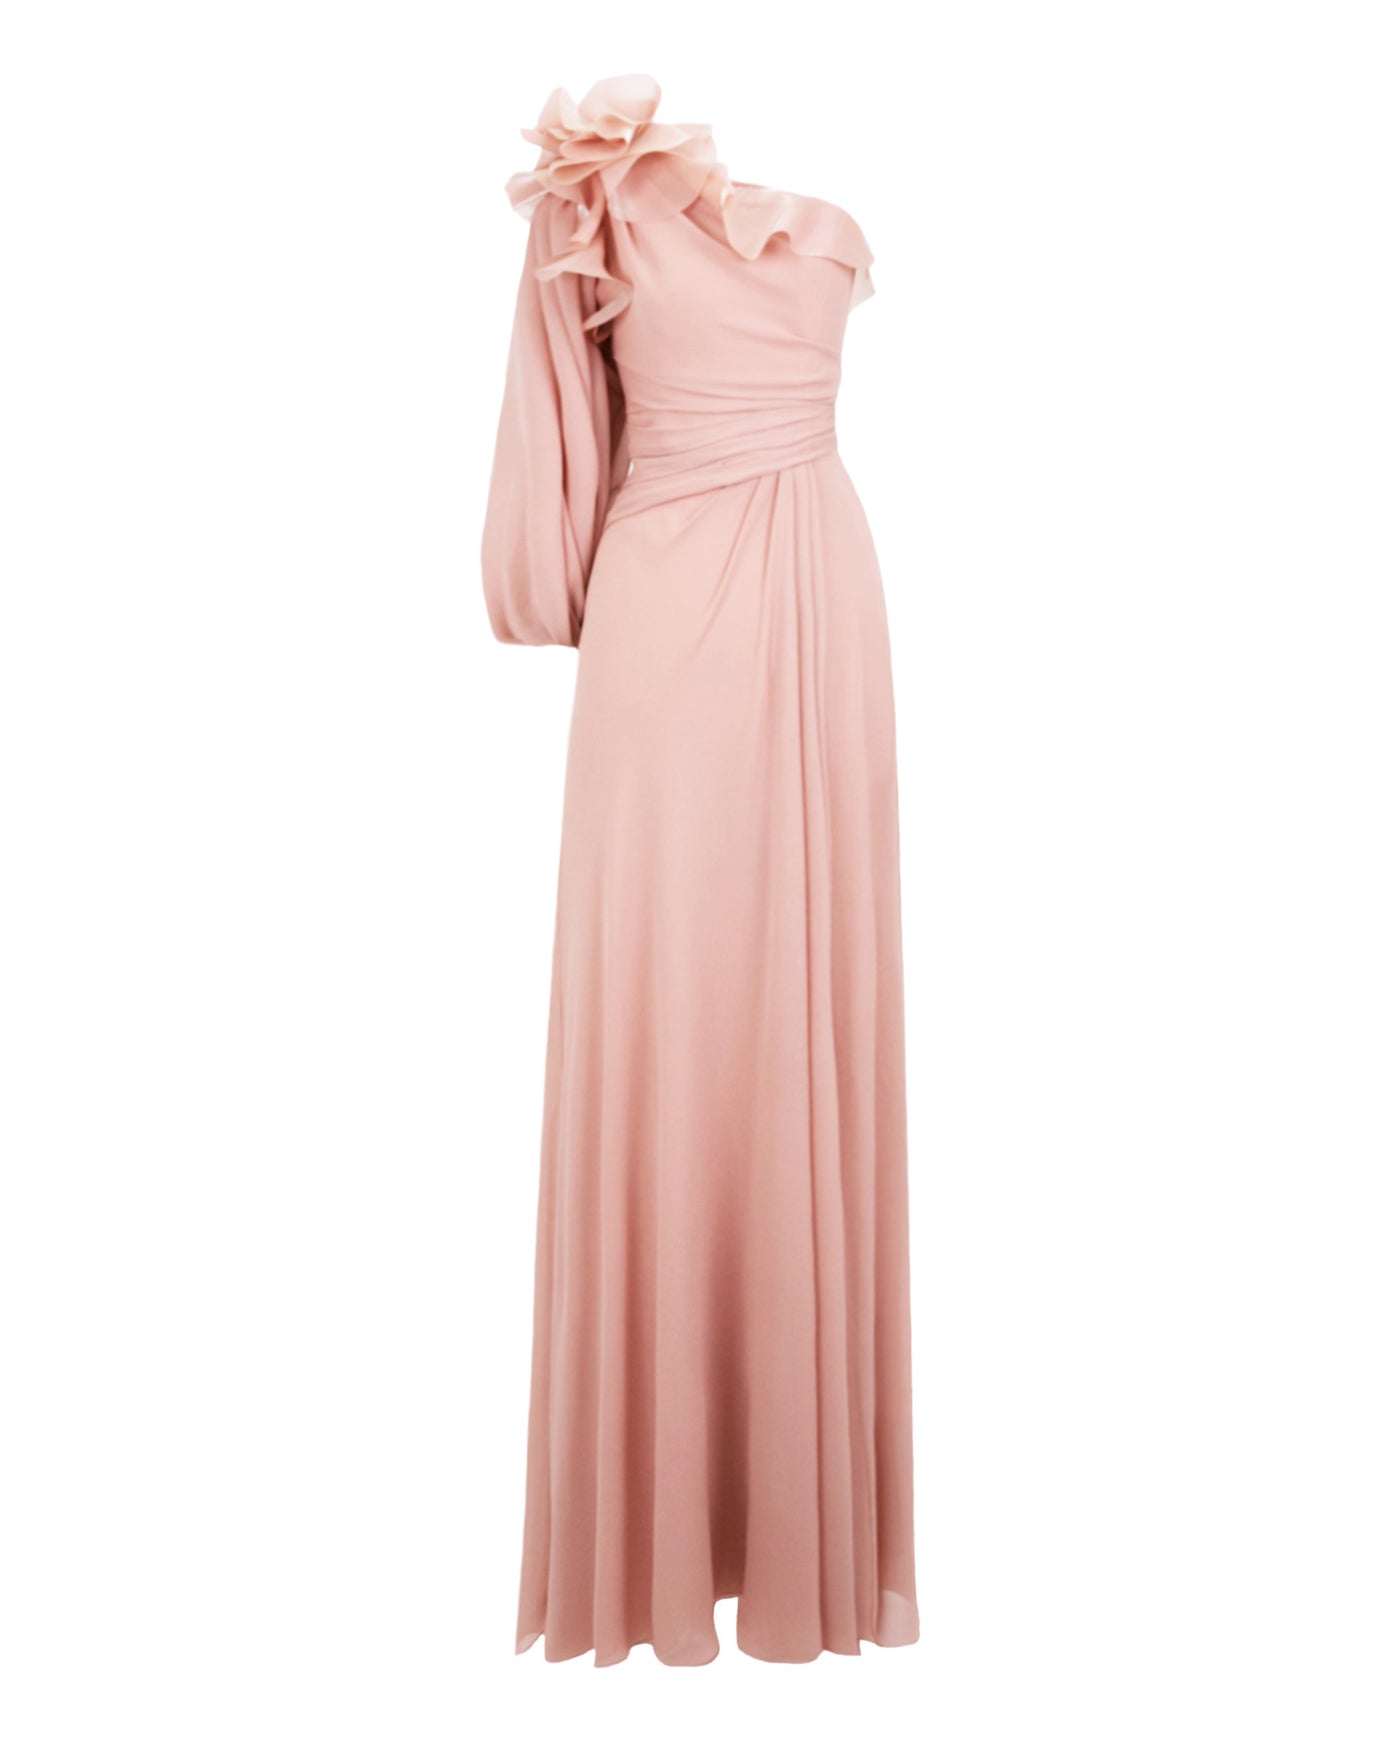 One-Shoulder with Draping Dress